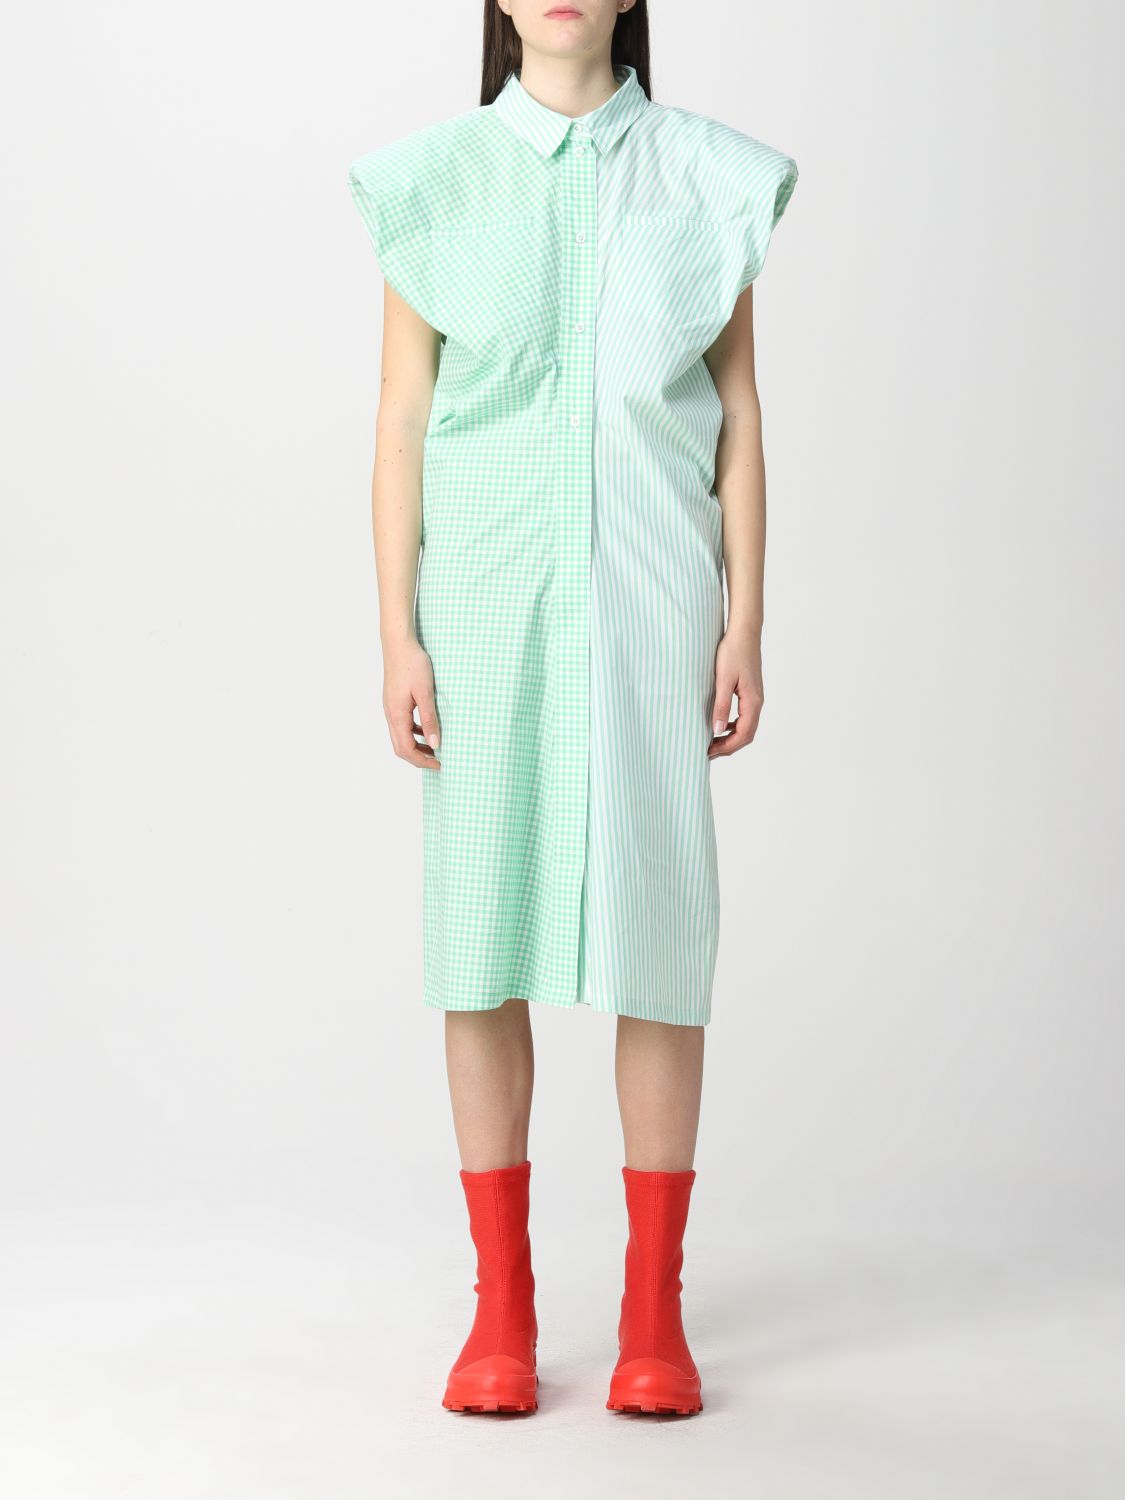 Dress Remain: Remain dress for woman mint 1